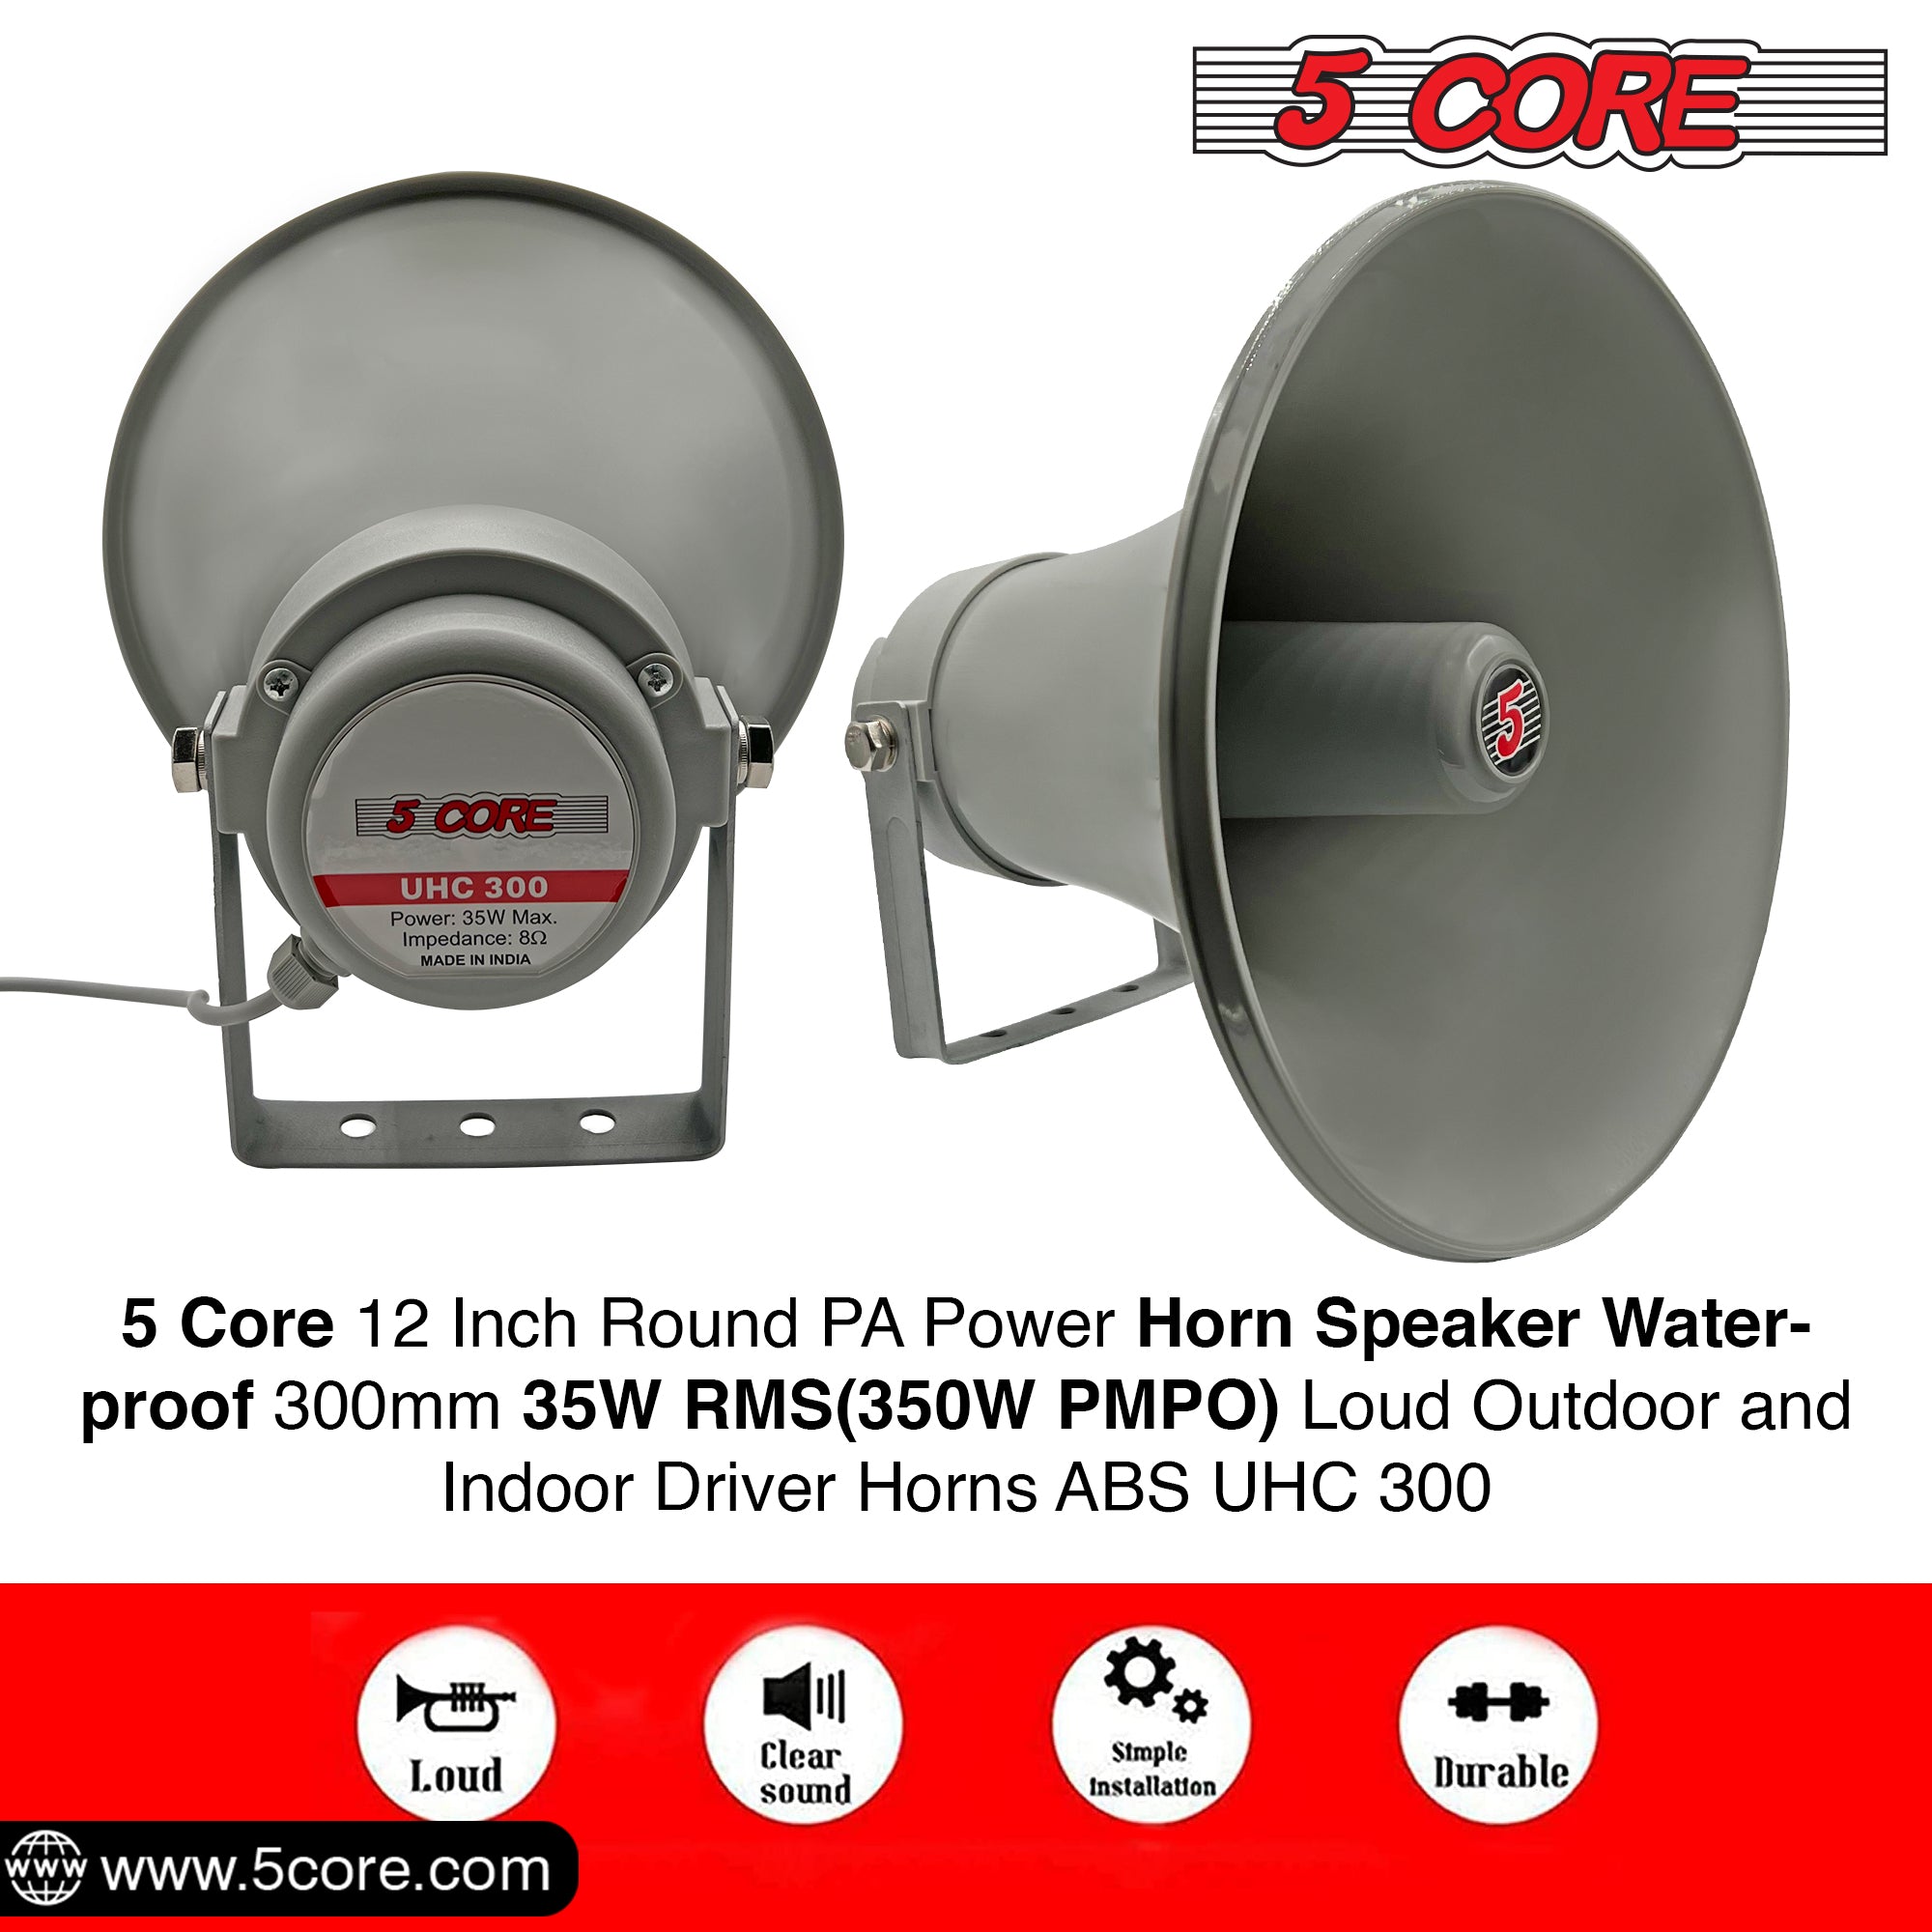 5 core 12 inch round pa power horn speaker